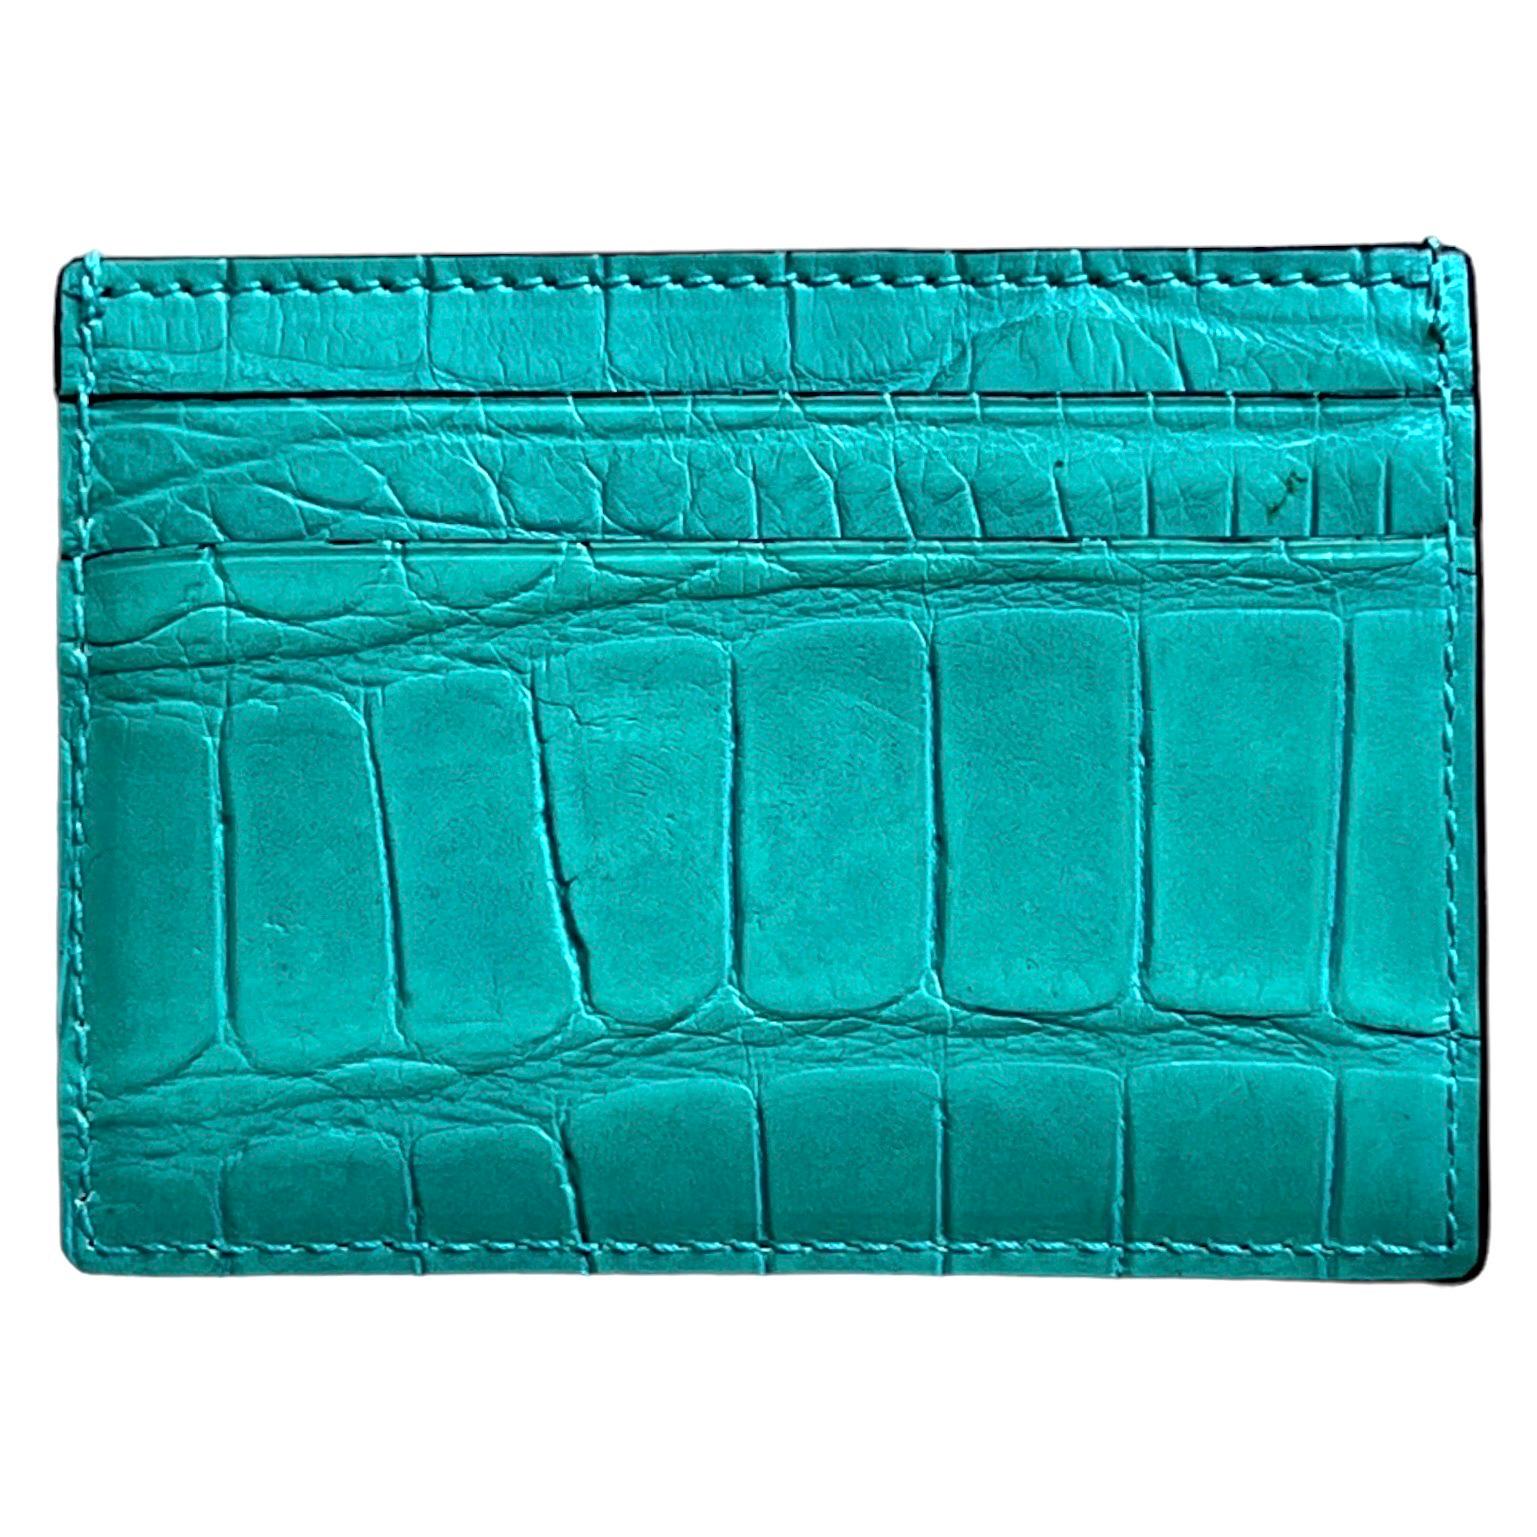 Precious leathers appear throughout the Gucci Exotics collection, their delicate textures add a unique note to the classic silhouette. 

Wonderful card case made from precious exotic crocodile skin
A rare and very special color and finishing - you